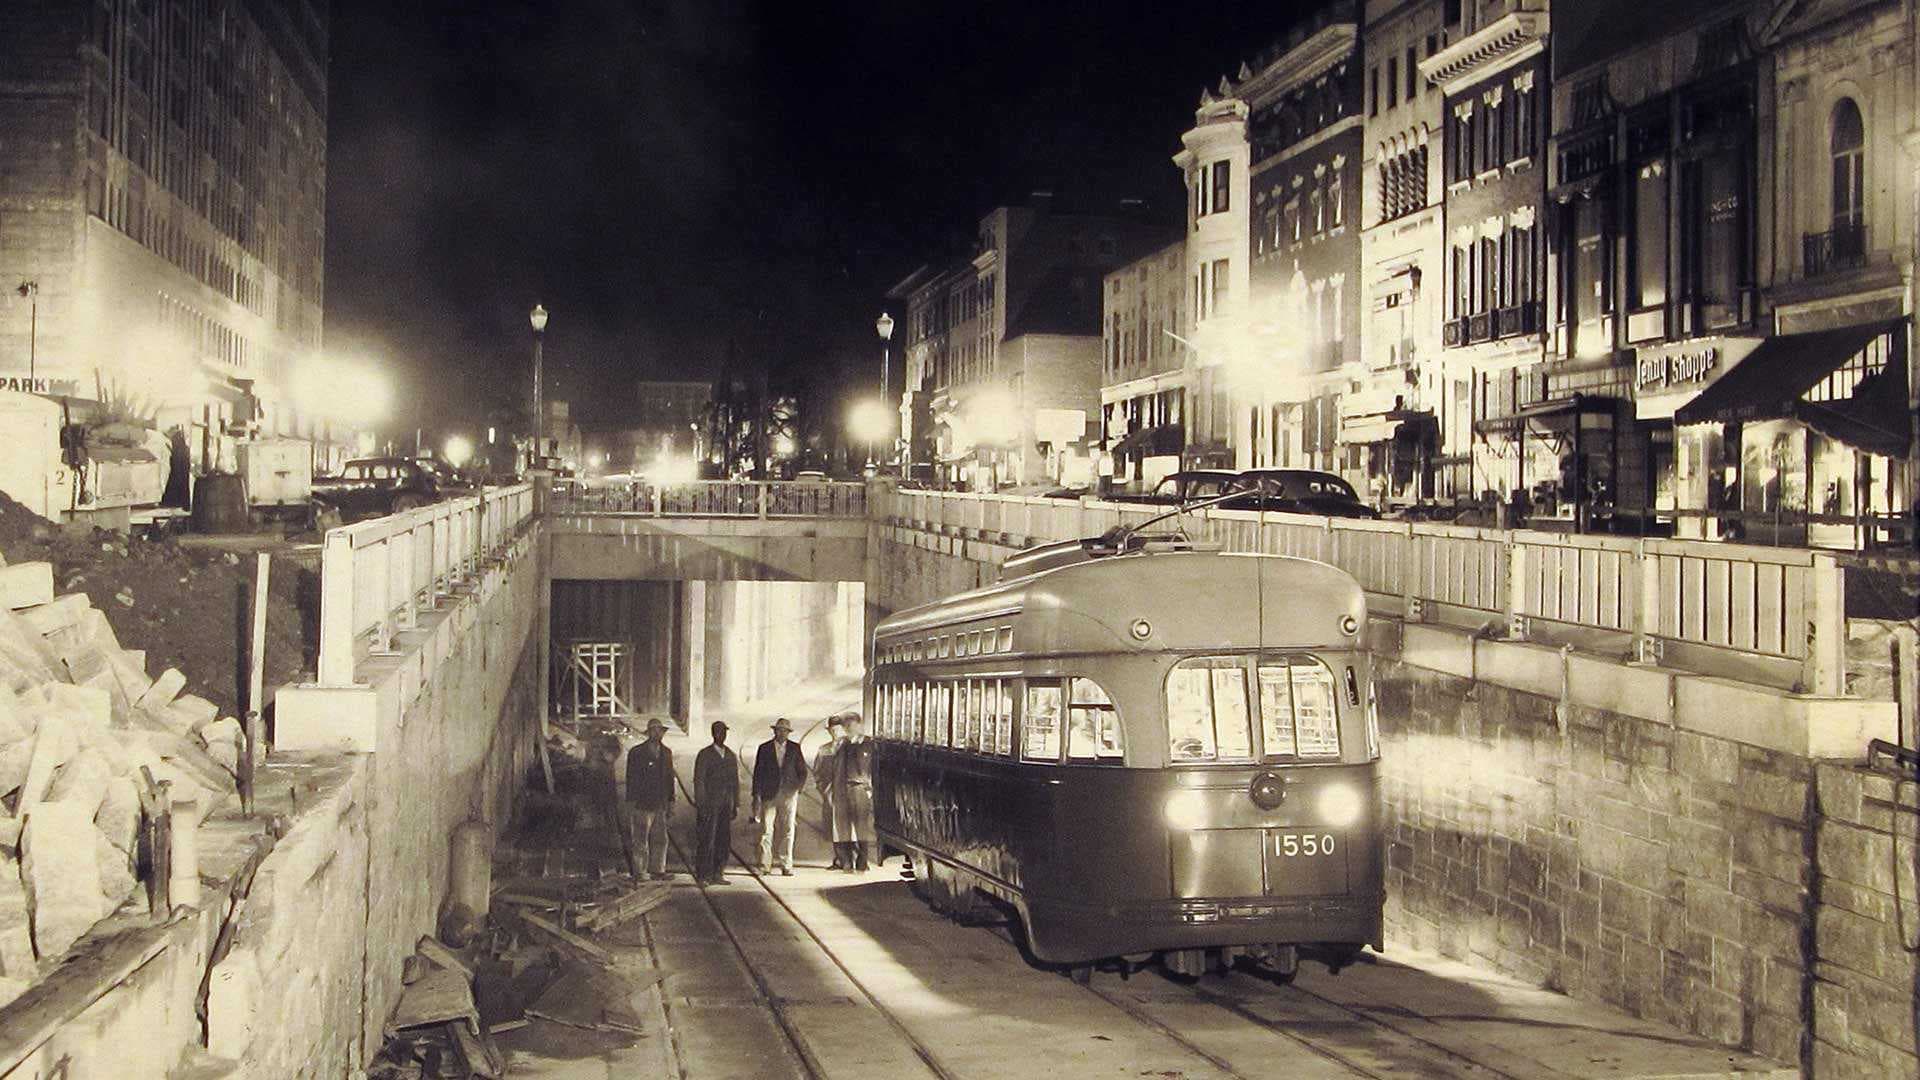 trolley emerging from tunnel under Dupont CIrcle